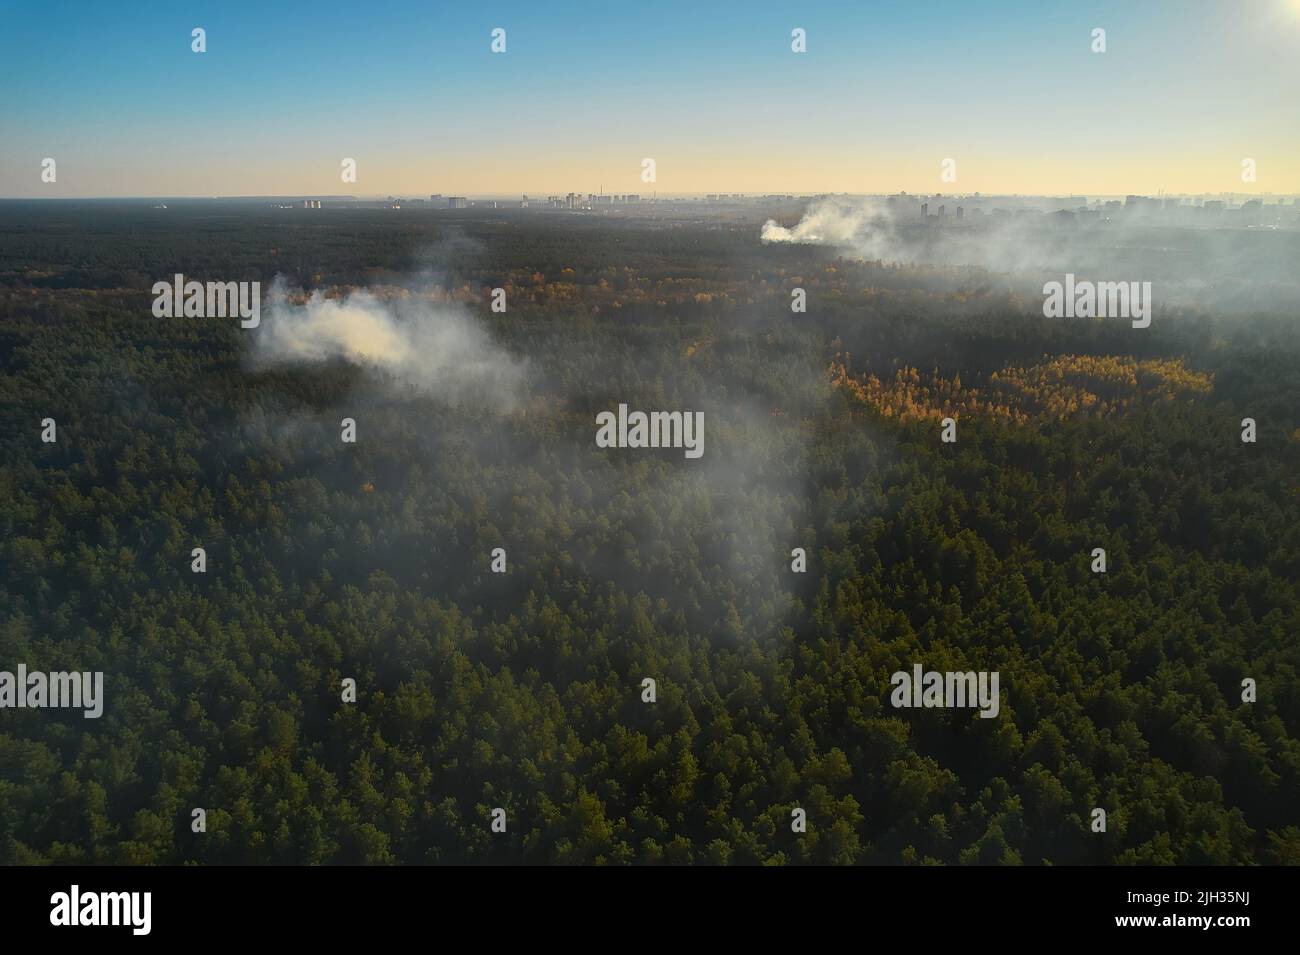 Aerial drone view of a wildfire in forested area. Stock Photo